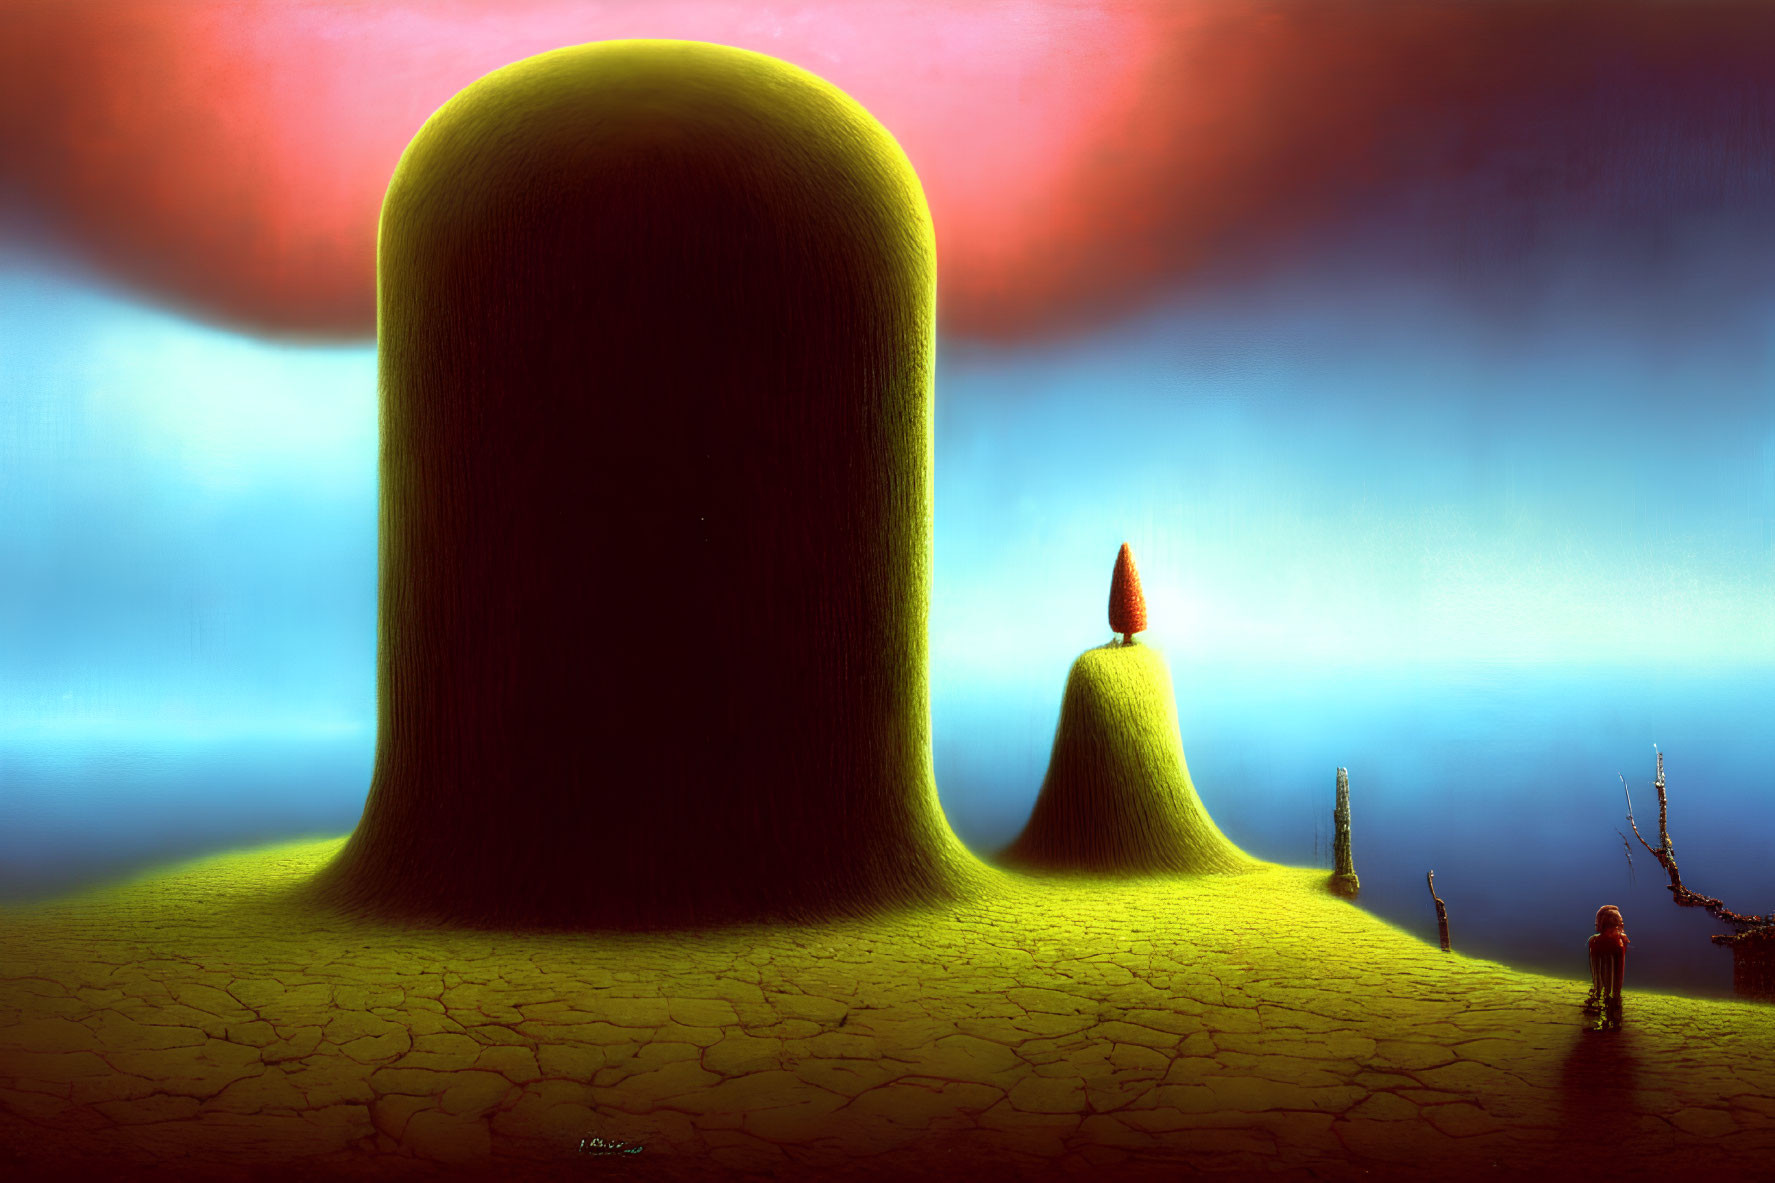 Surreal landscape featuring mound-like structures, red and blue gradient sky, small figure, withered